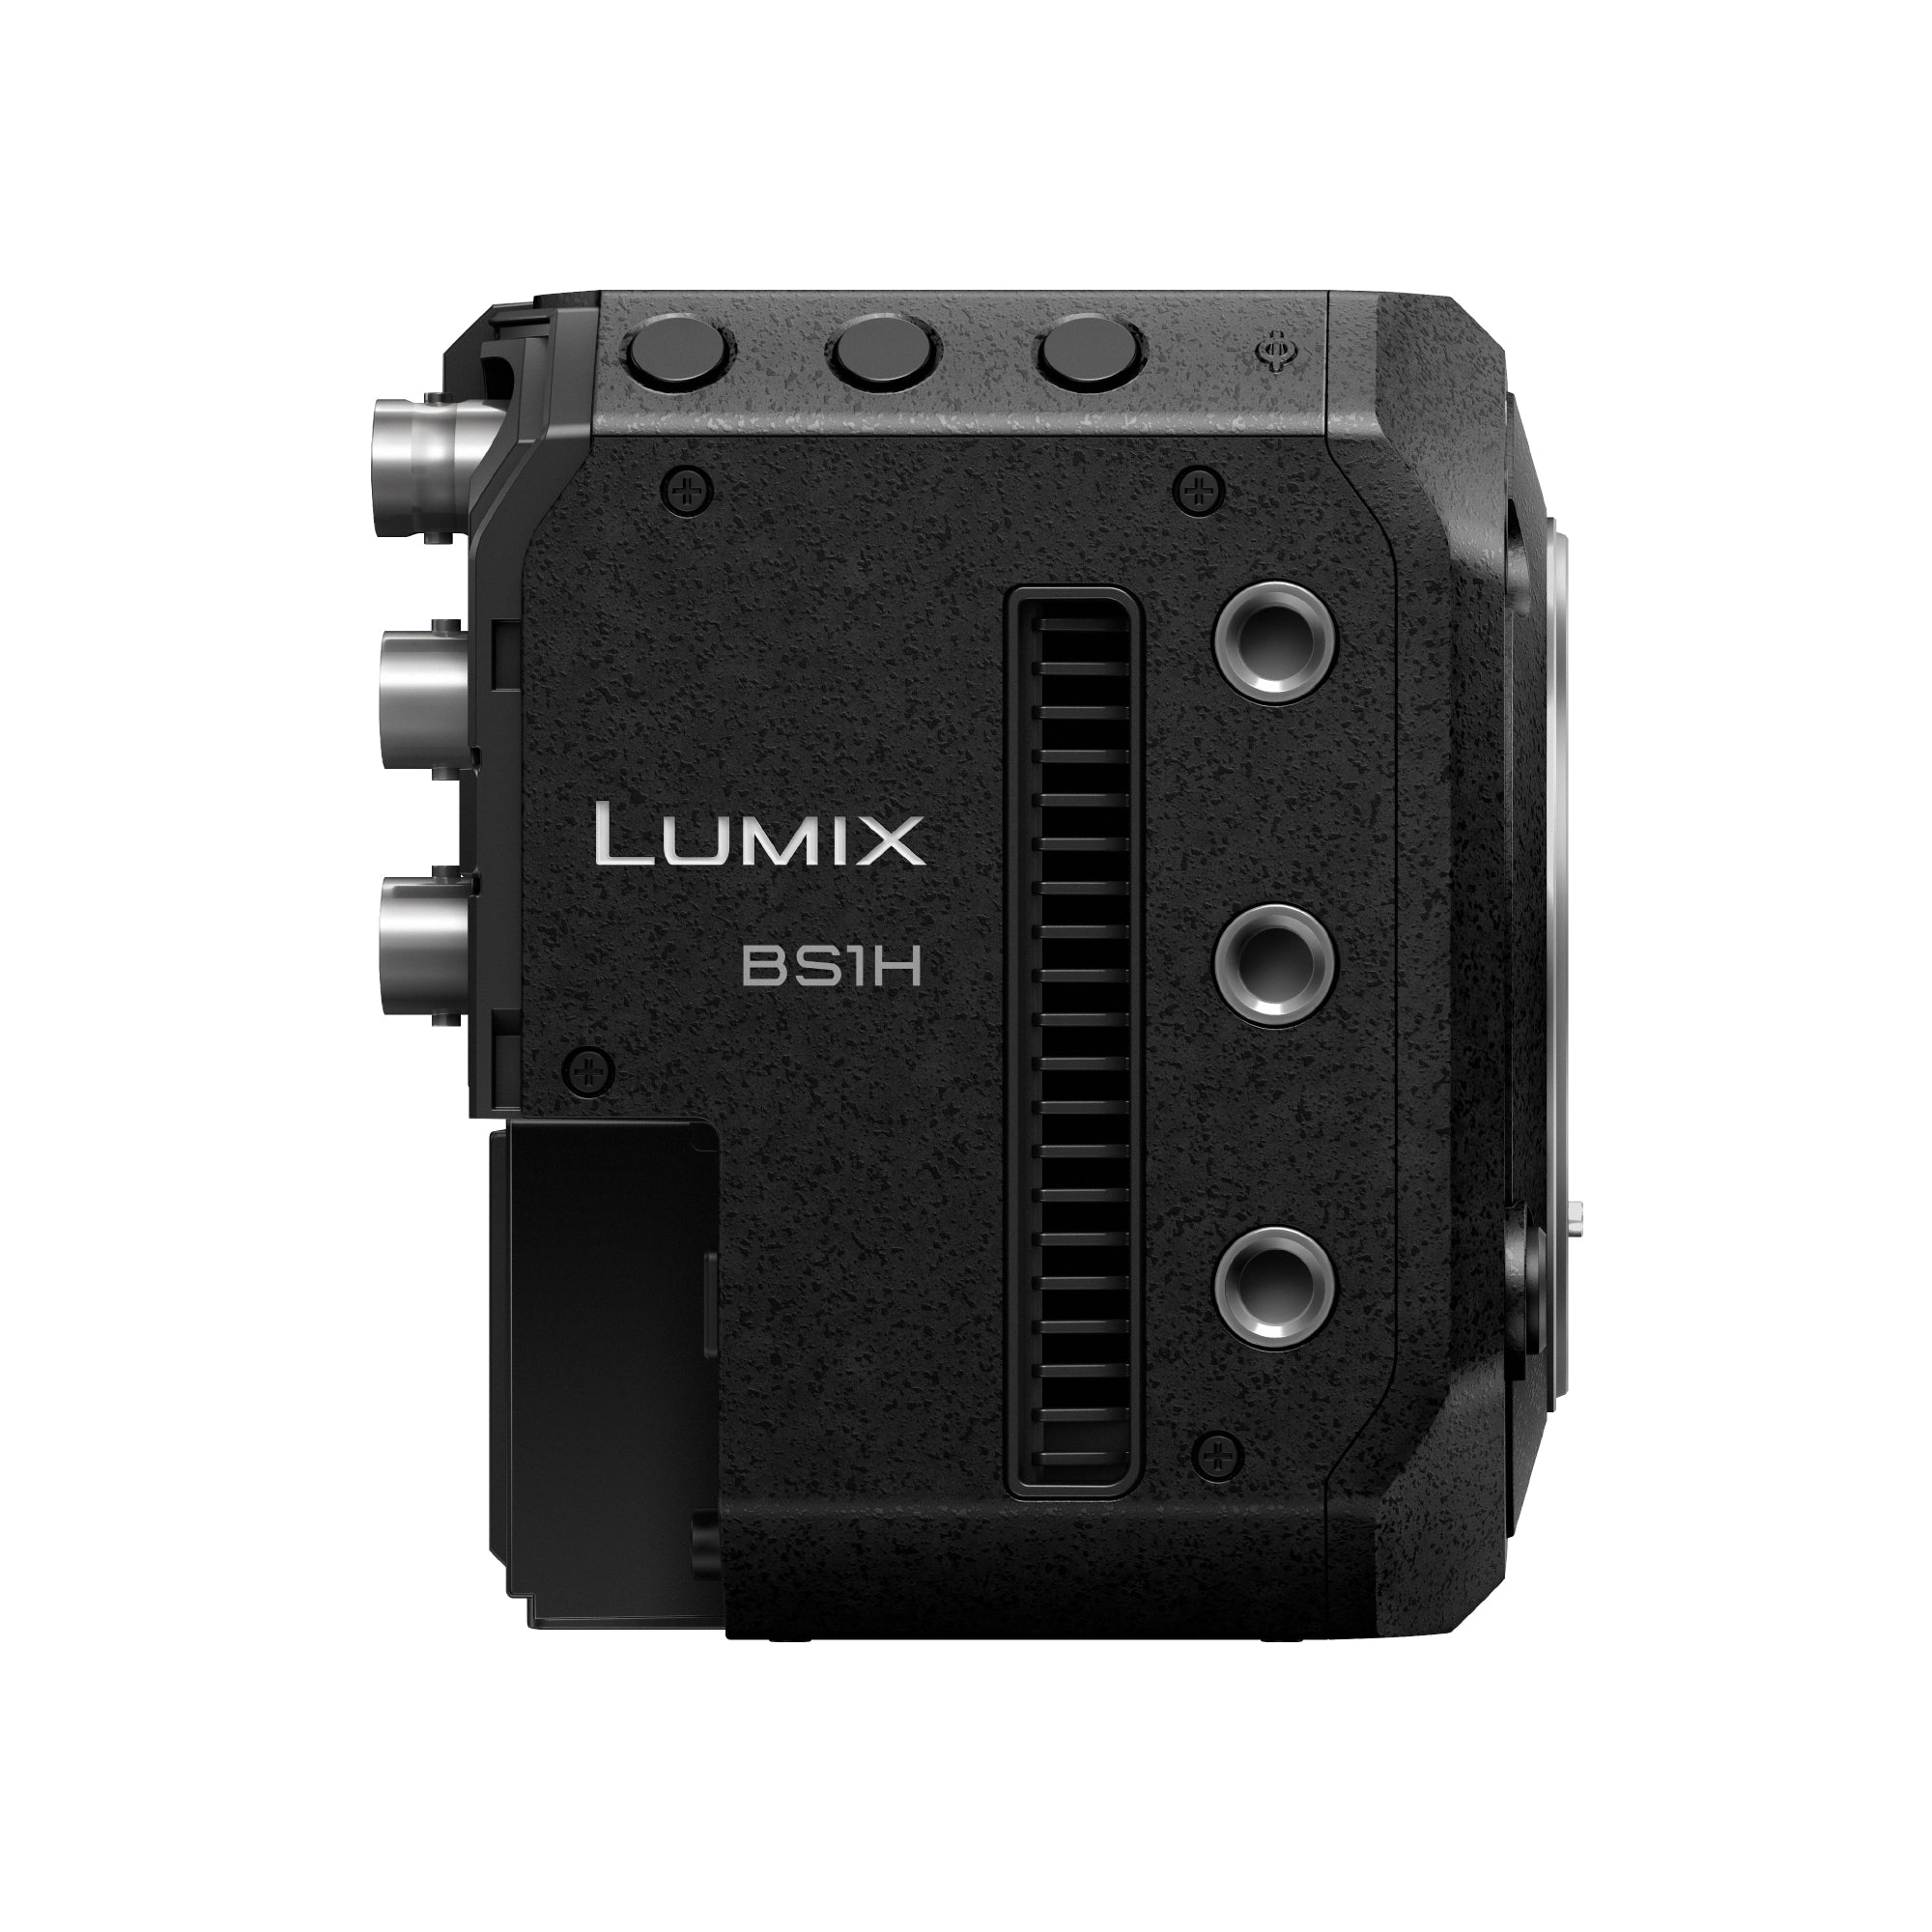 Panasonic Lumix BS1H full-frame box camera maxes out on connectivity -  Videomaker